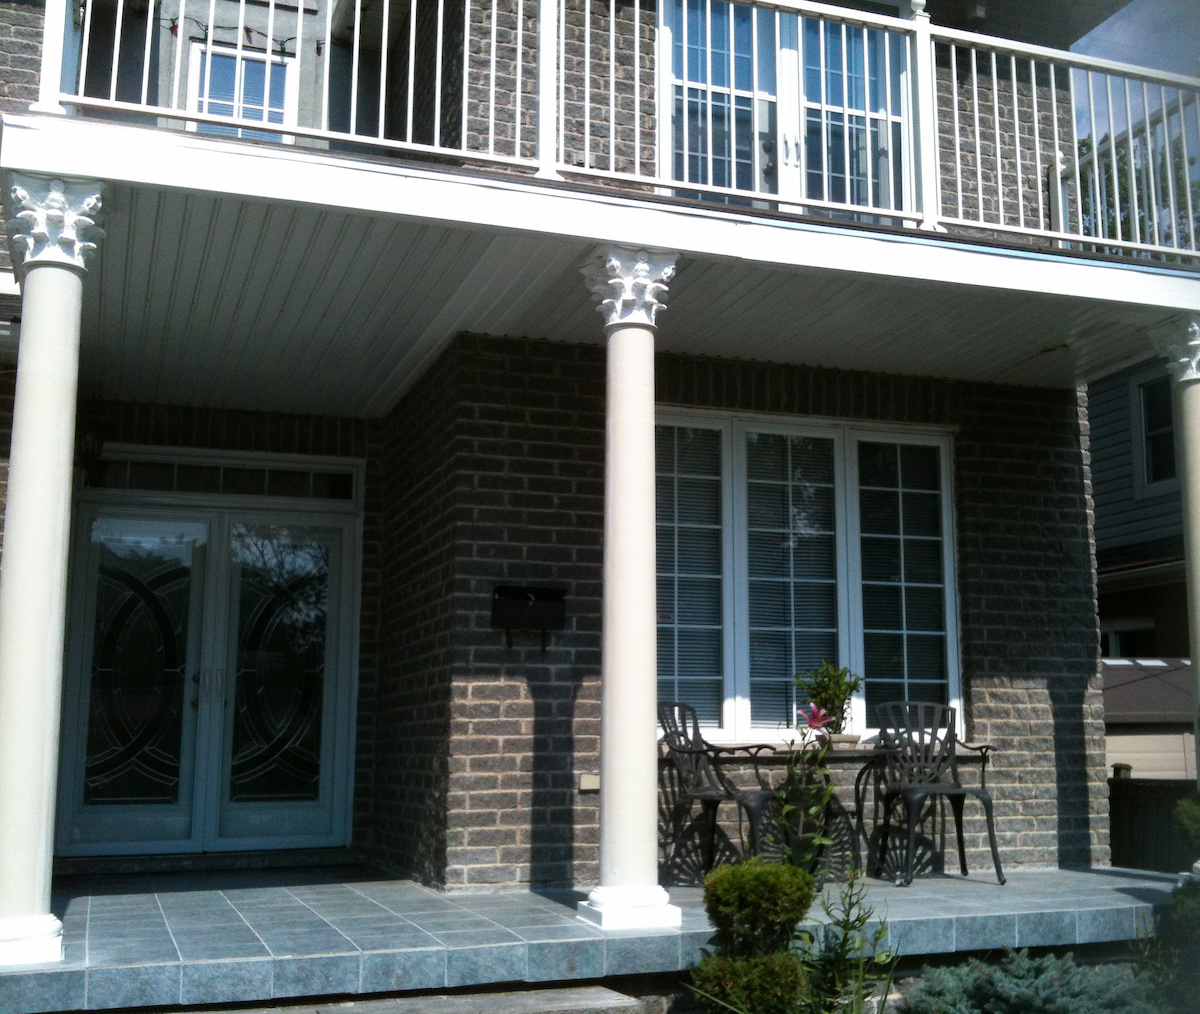 Round fibreglass columns with corinthian capitals on front porch of home